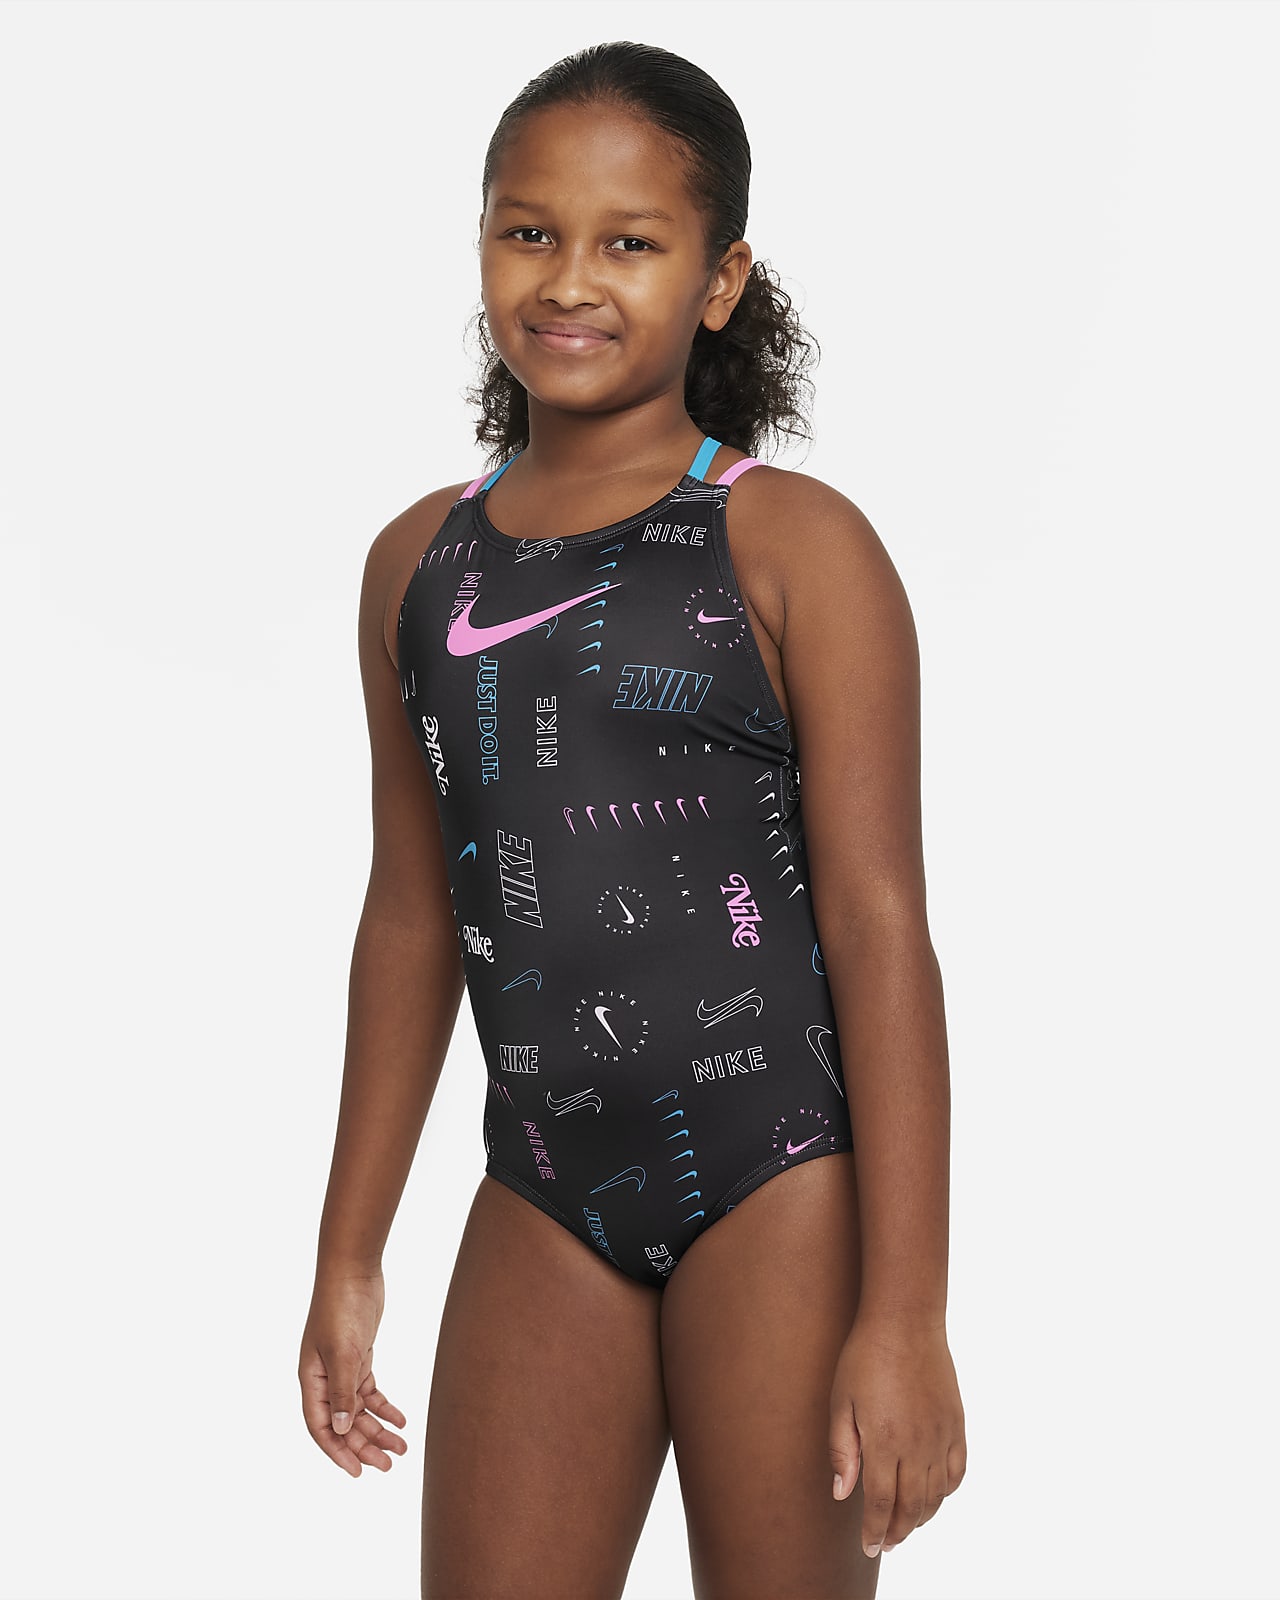 Madwave Junior Swimsuits for Teen Girls Fun M1409 06 from Gaponez Sport Gear